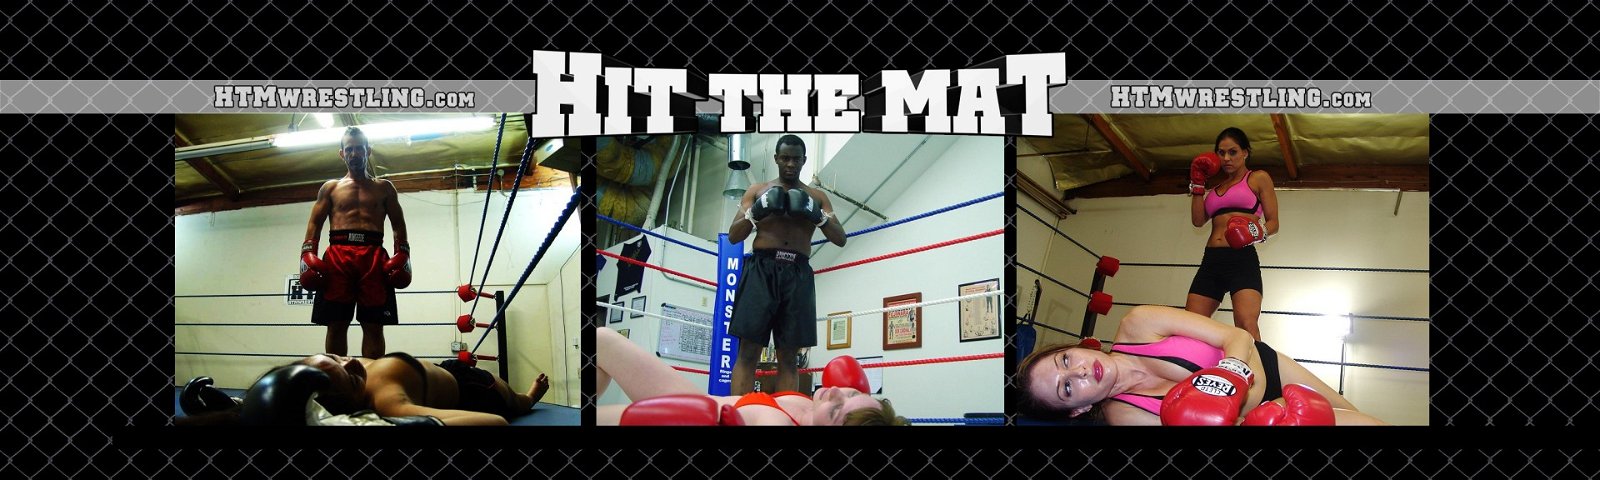 Cover photo of HTMFights